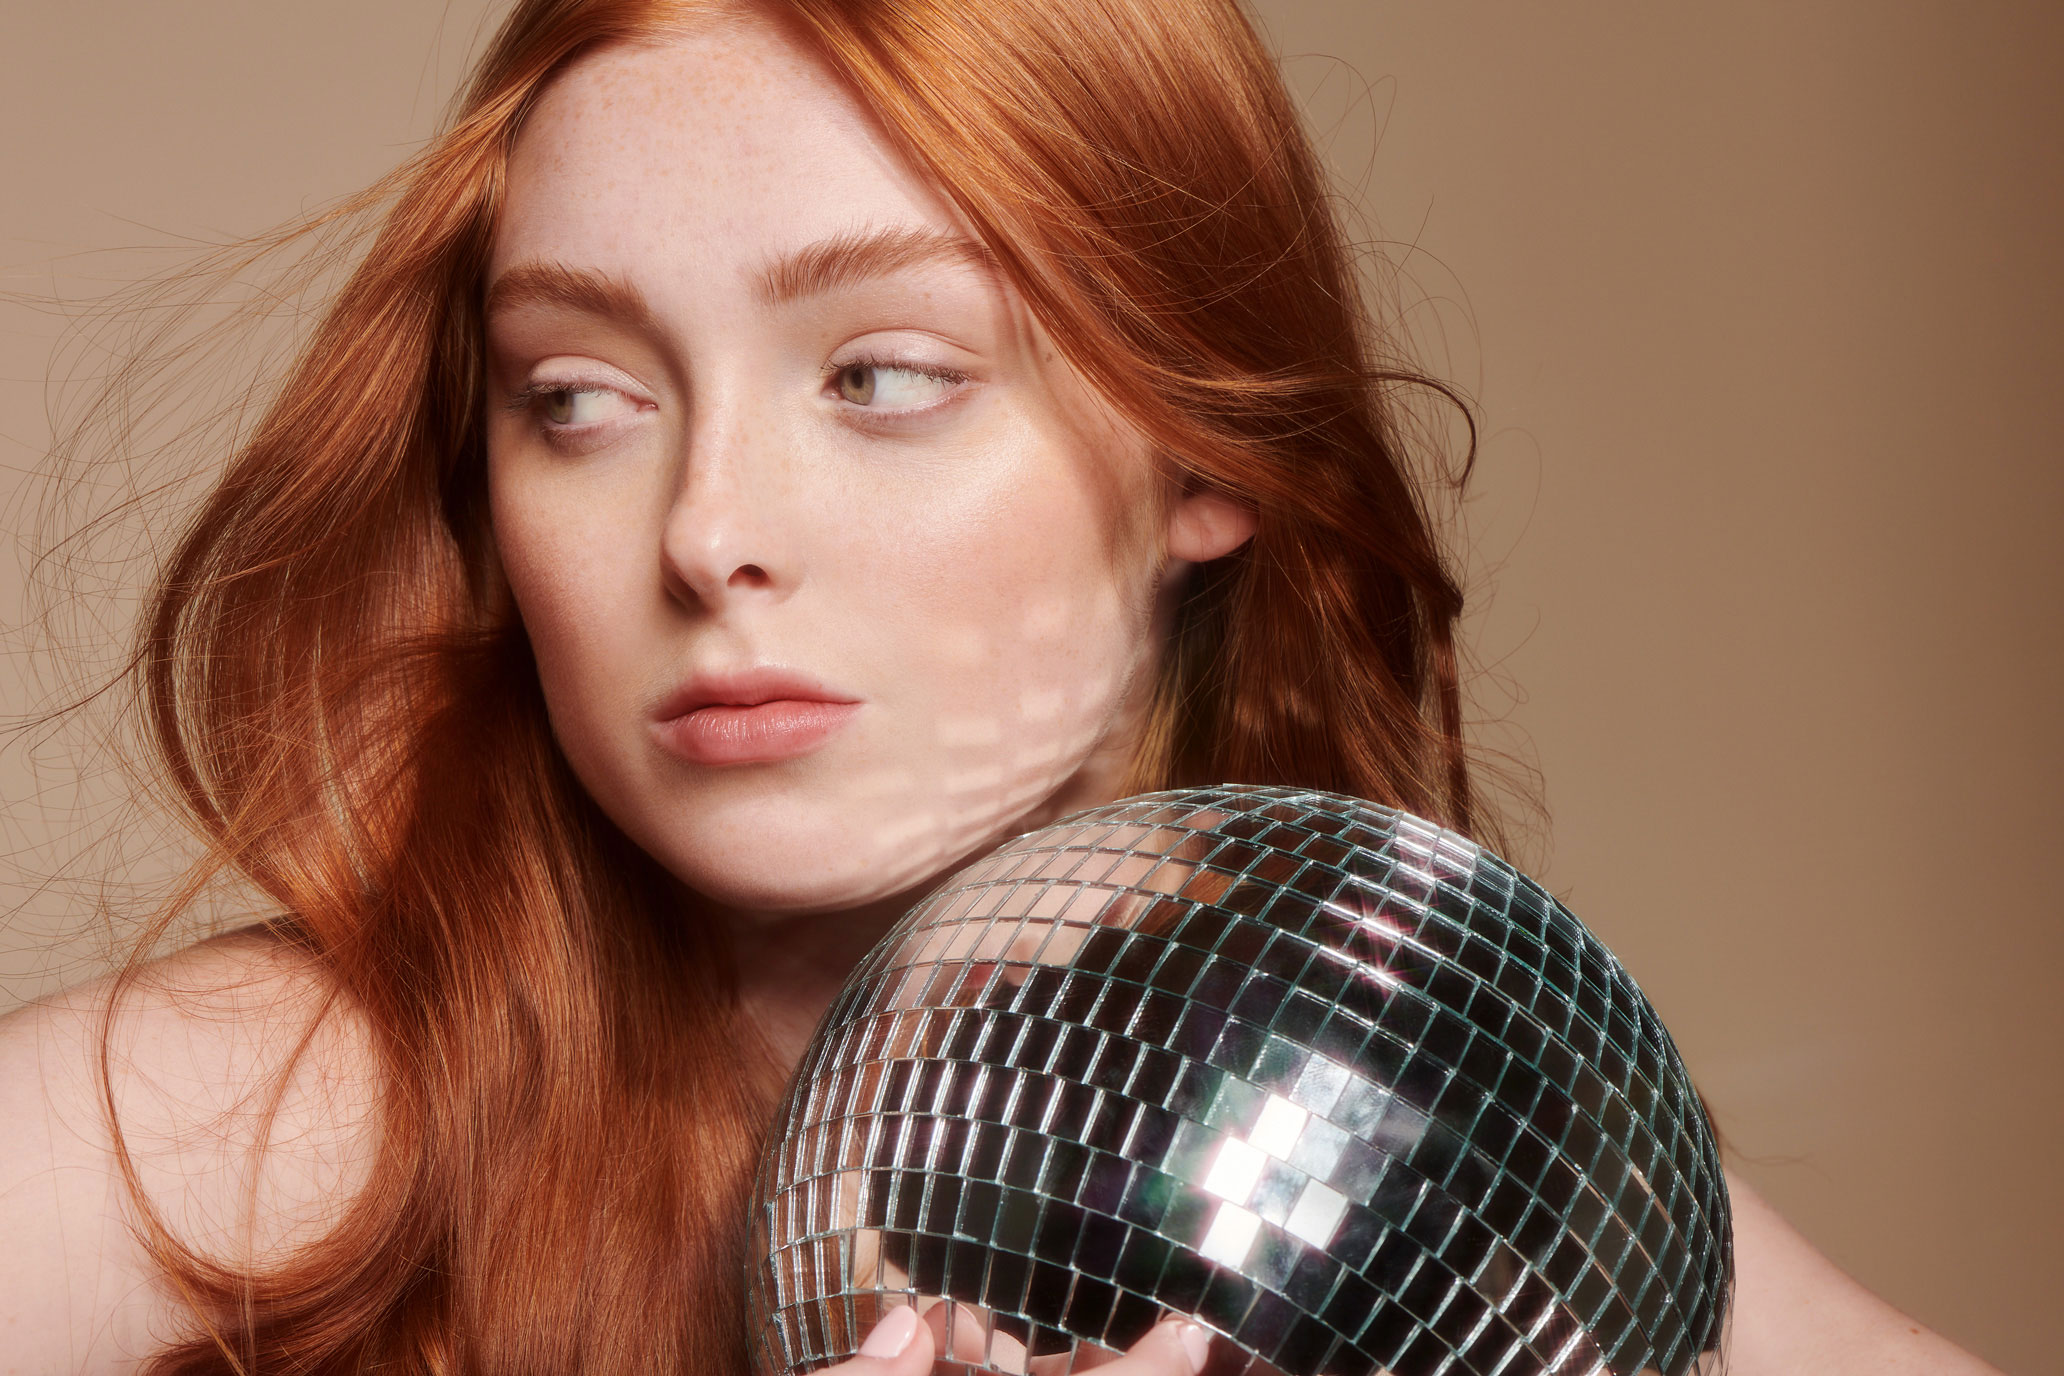 Portrait of female model holding a disco ball featuring a clean, no-makeup look and soft curls